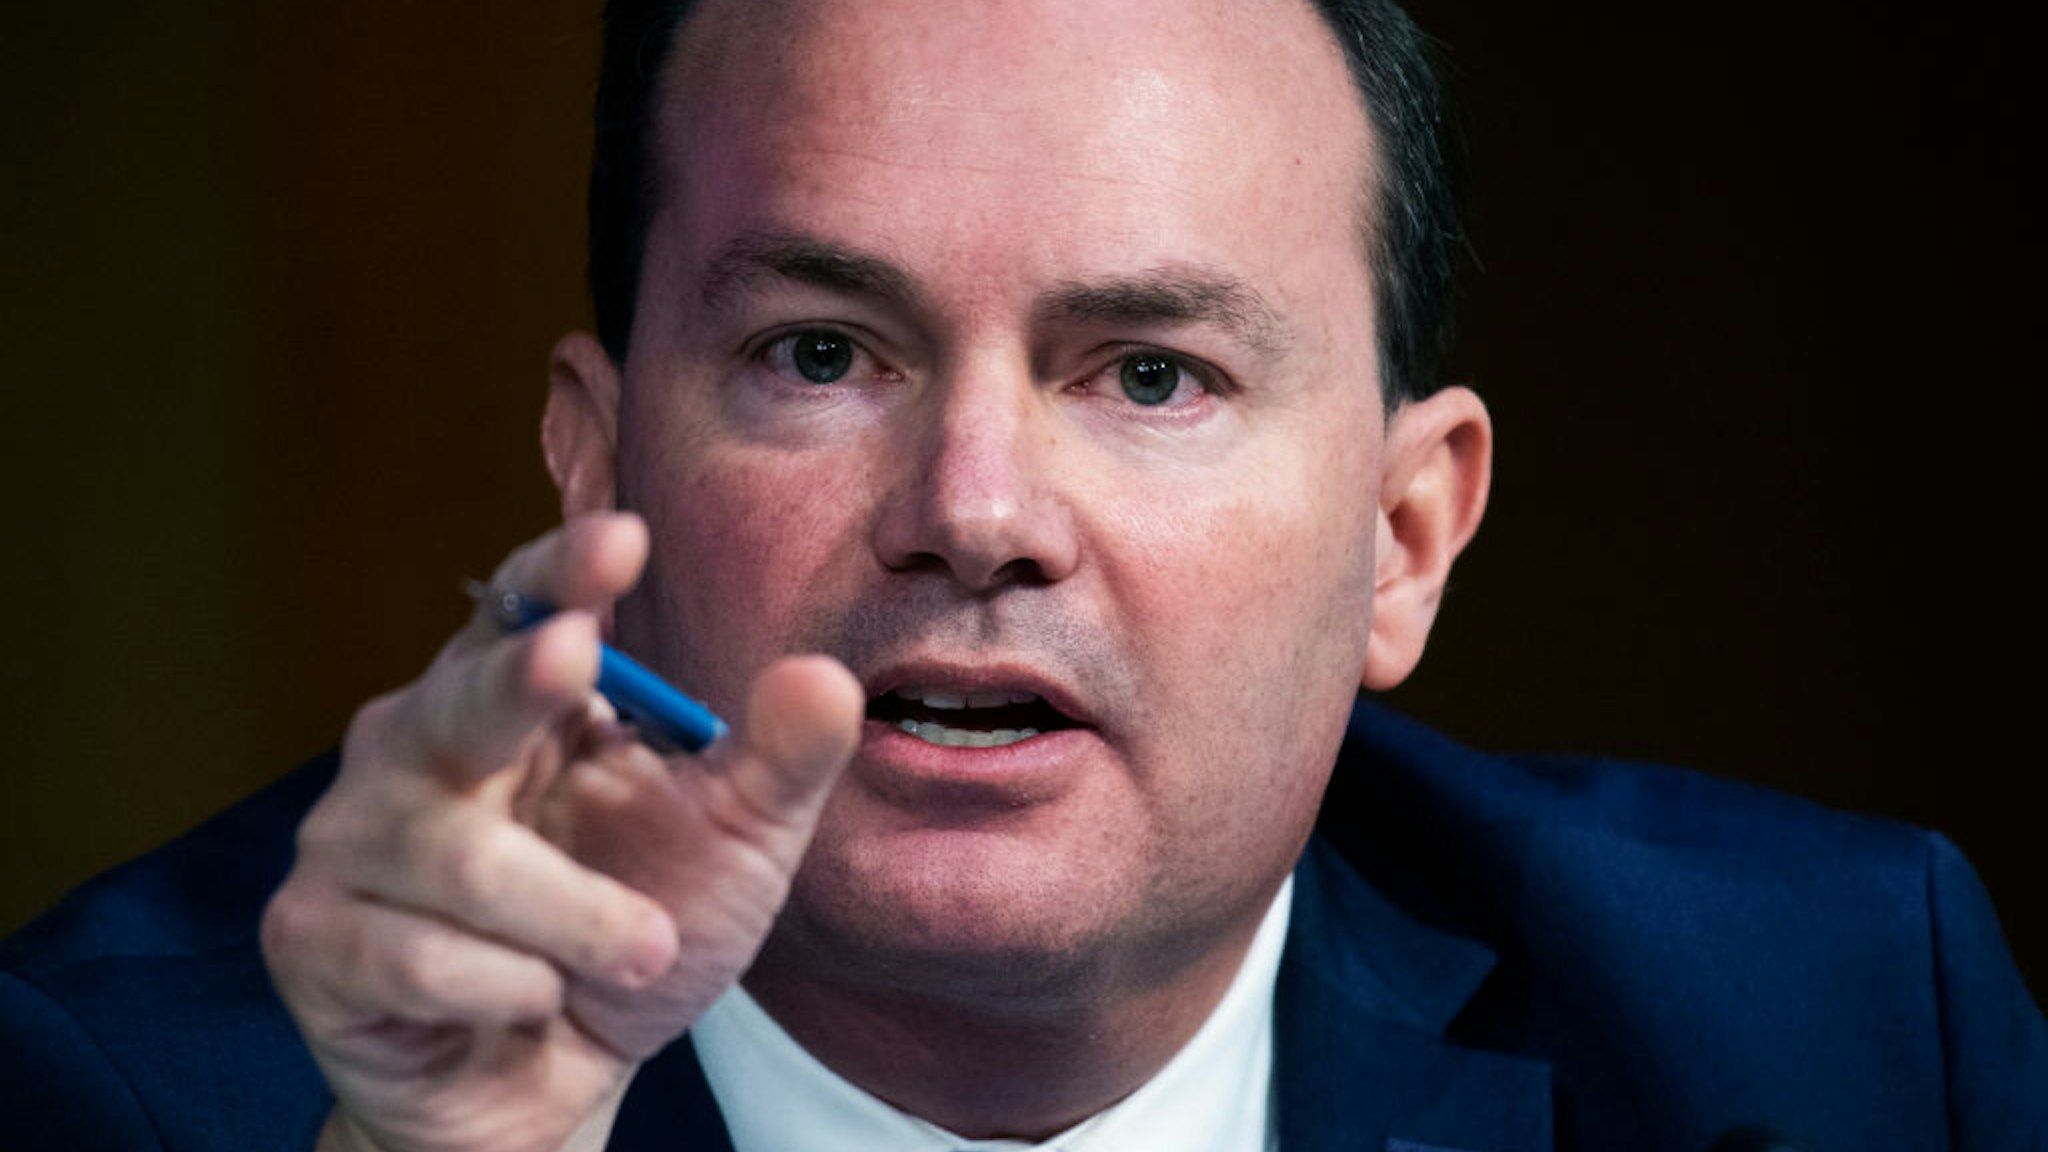 Sen. Mike Lee, R-Utah., questions Supreme Court justice nominee Amy Coney Barrett on the second day of her Senate Judiciary Committee confirmation hearing in Hart Senate Office Building on Tuesday, October 13, 2020.